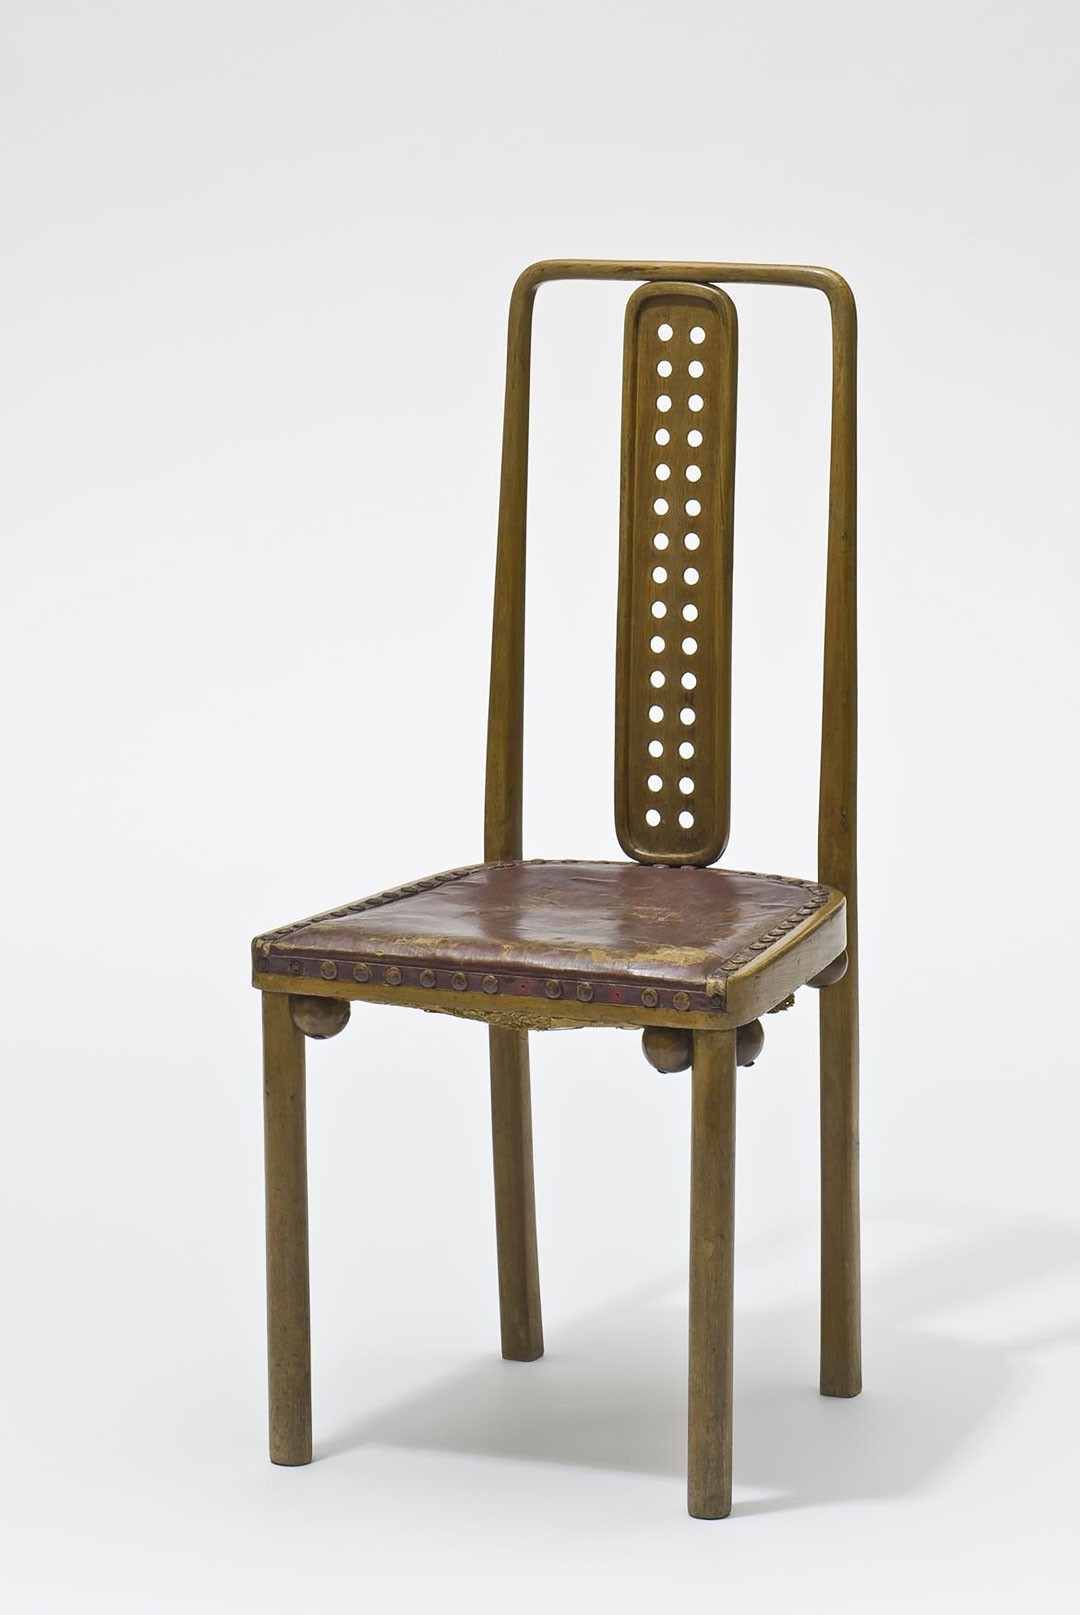 <BODY>Josef Hoffmann, Chair, Model No. 322, for the dining room of the Sanatorium Westend in Purkersdorf, Vienna, 1904<br />© MAK/Georg Mayer</BODY>